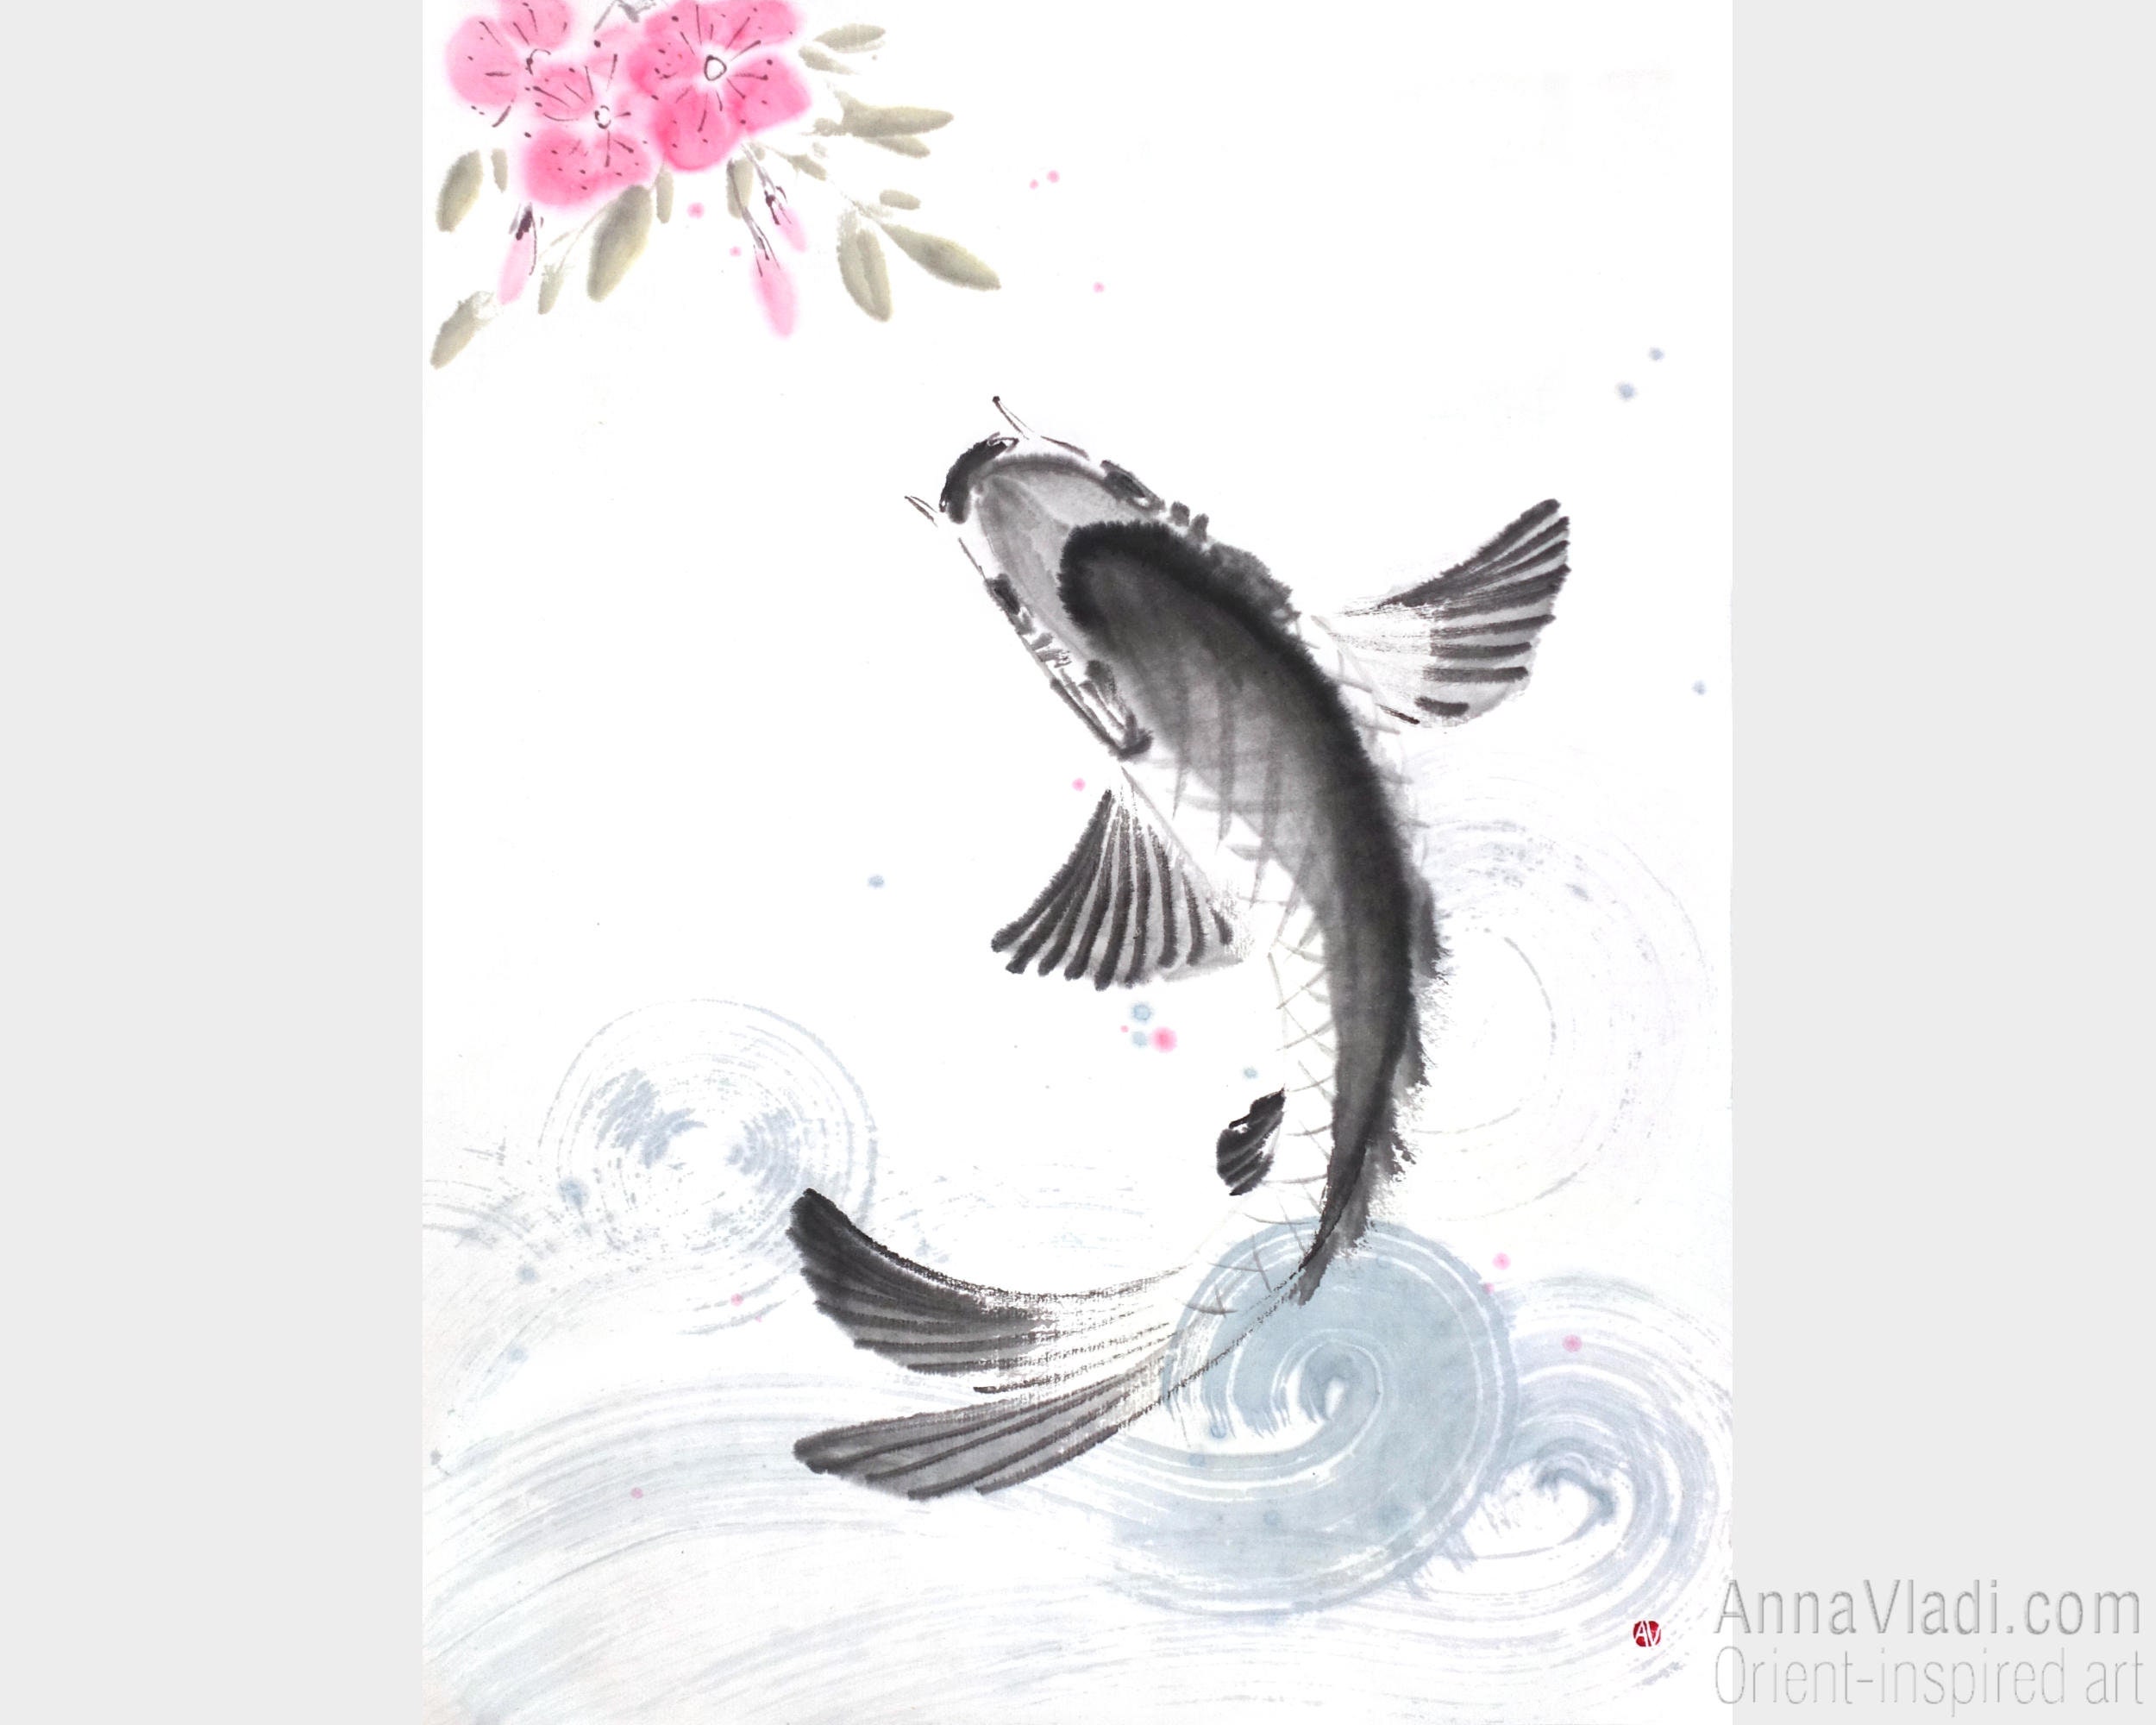 Koi Fish and Cherry Blossom Original Sumi-e Painting of Japanese Carp and  Sakura Flowers in Chinese Ink on Rice Paper, Large Wall Art -  Canada